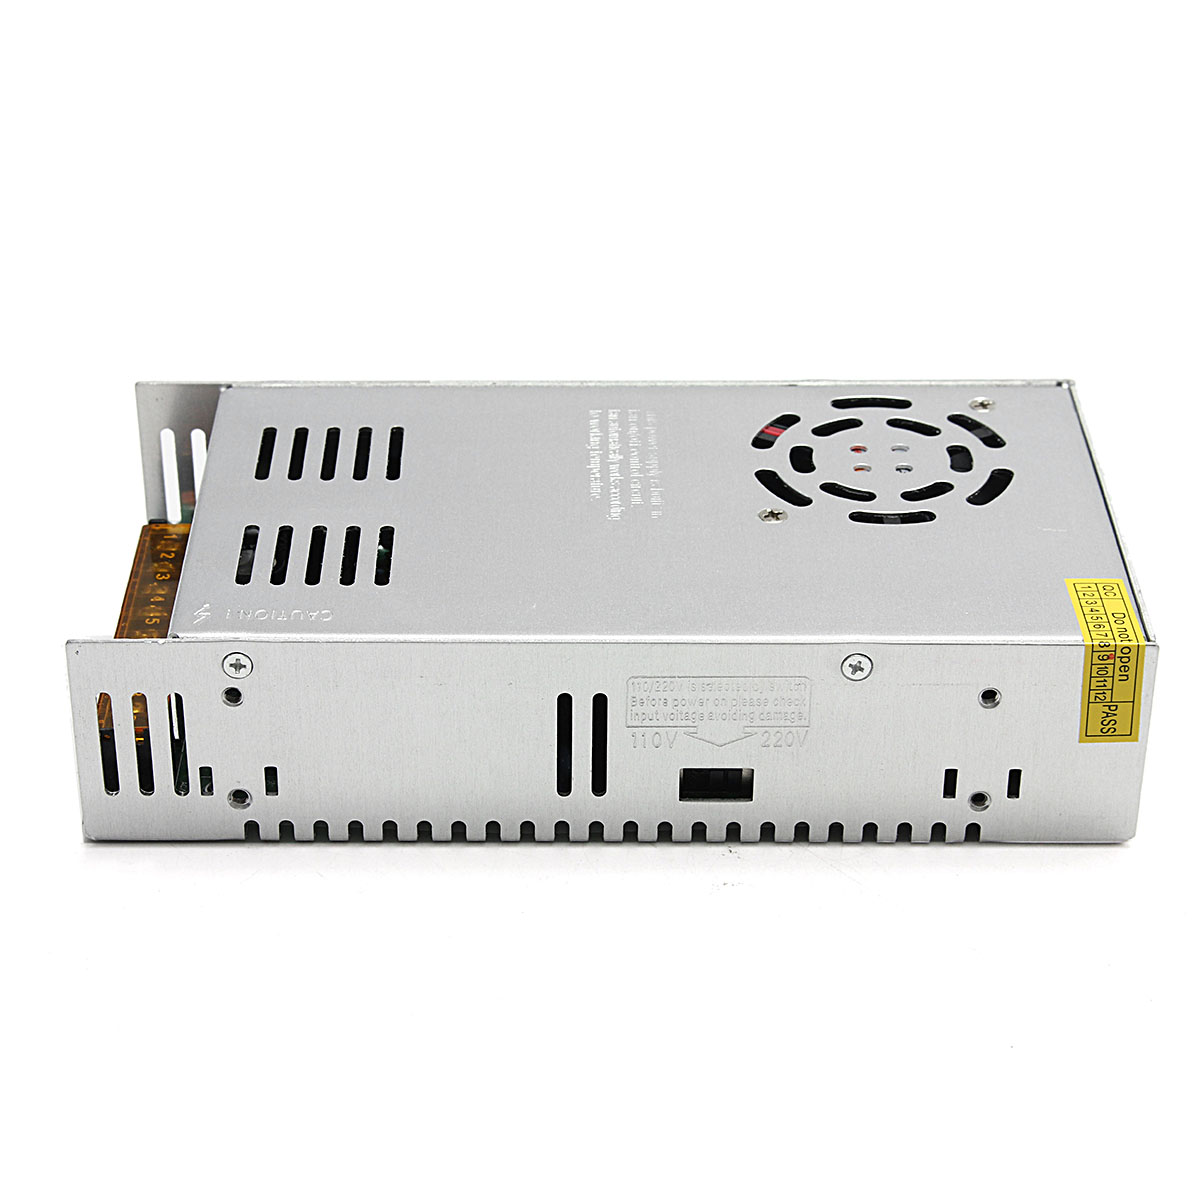 Geekcreitreg-AC-110-240V-Input-To-DC-24V-17A-400W-Switching-Power-Supply-Driver-Board-1272112-6